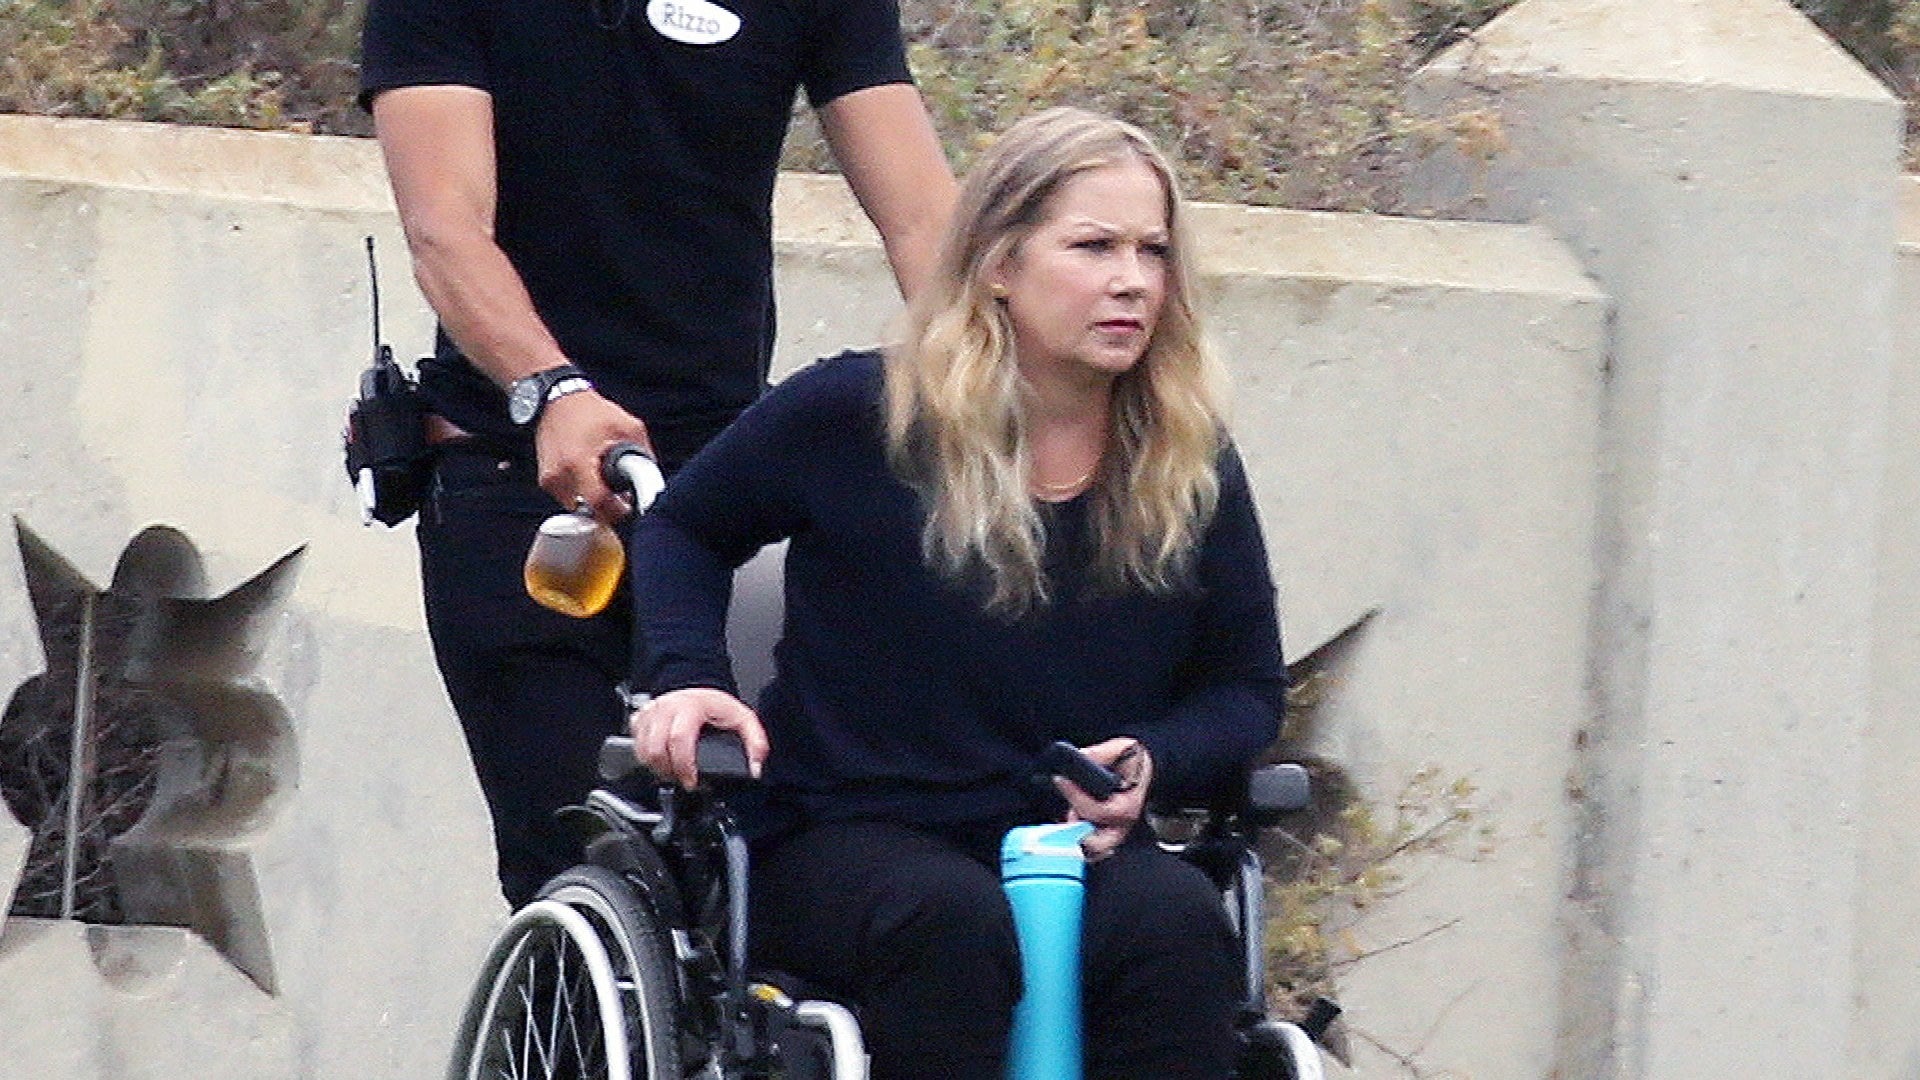 Christina Applegate Says She 'Can't Walk Without a Cane' After MS